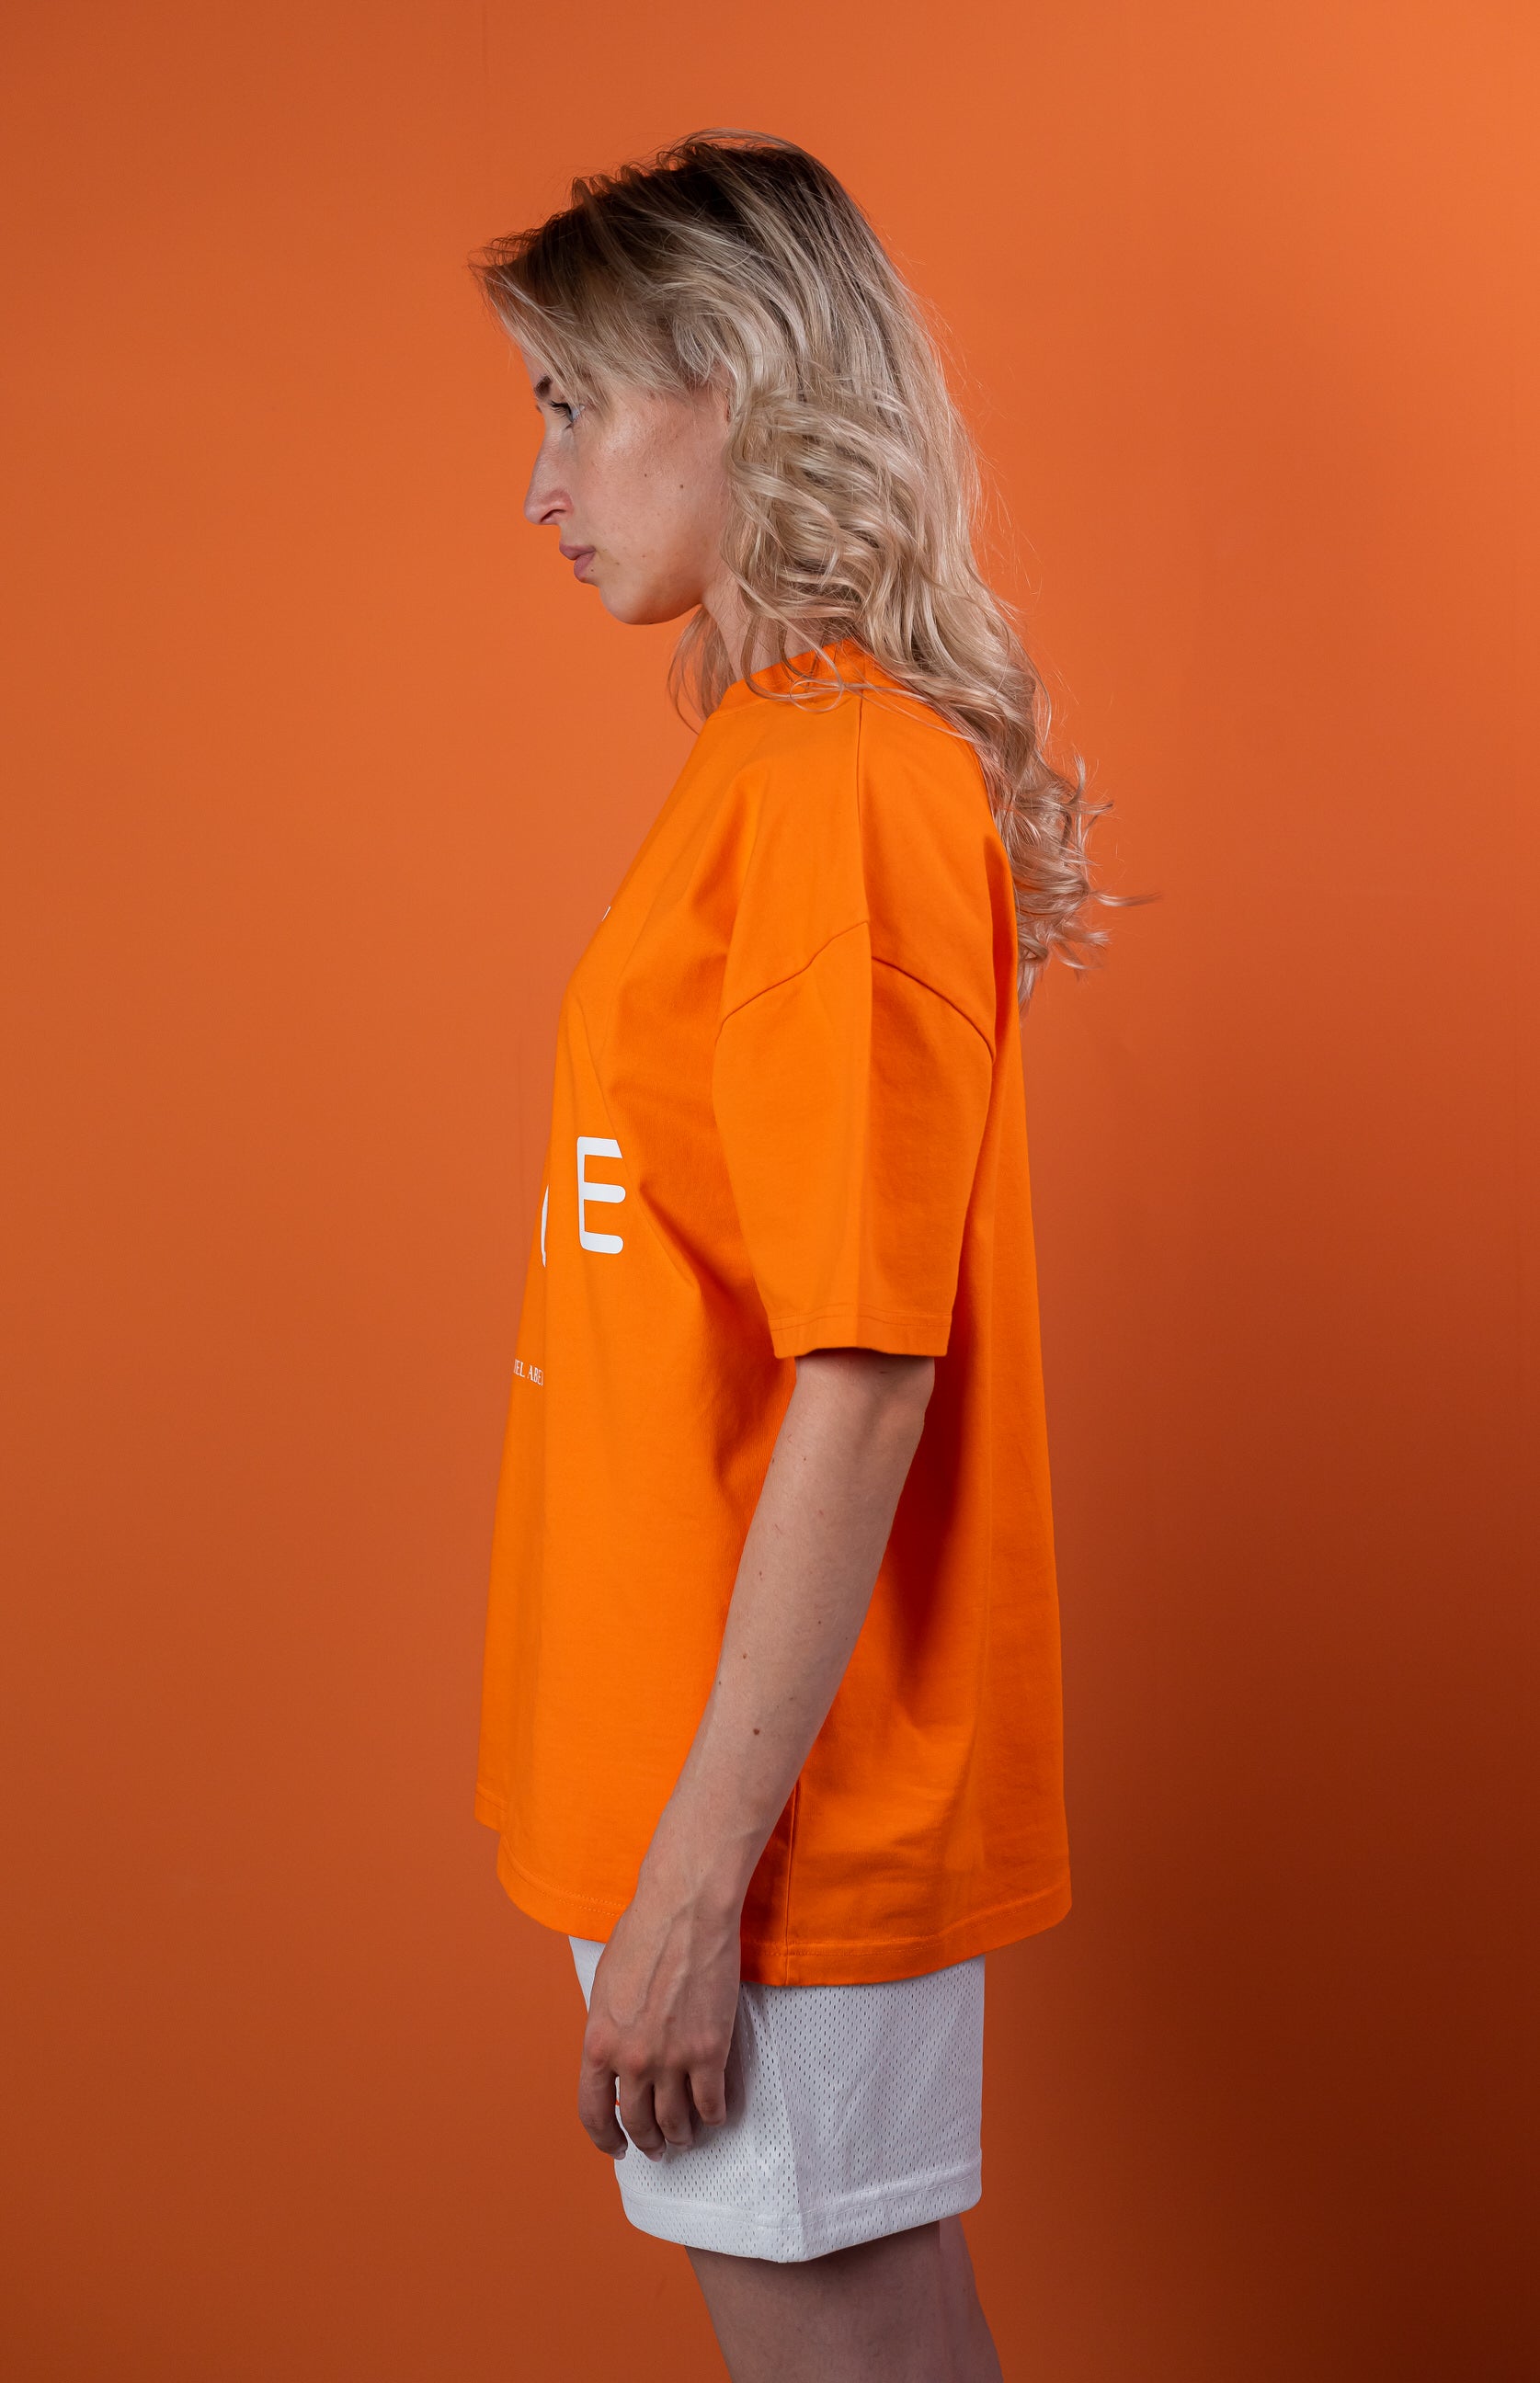 Female Model wearing Orange oversize tshirt with "be nice" print on the front 